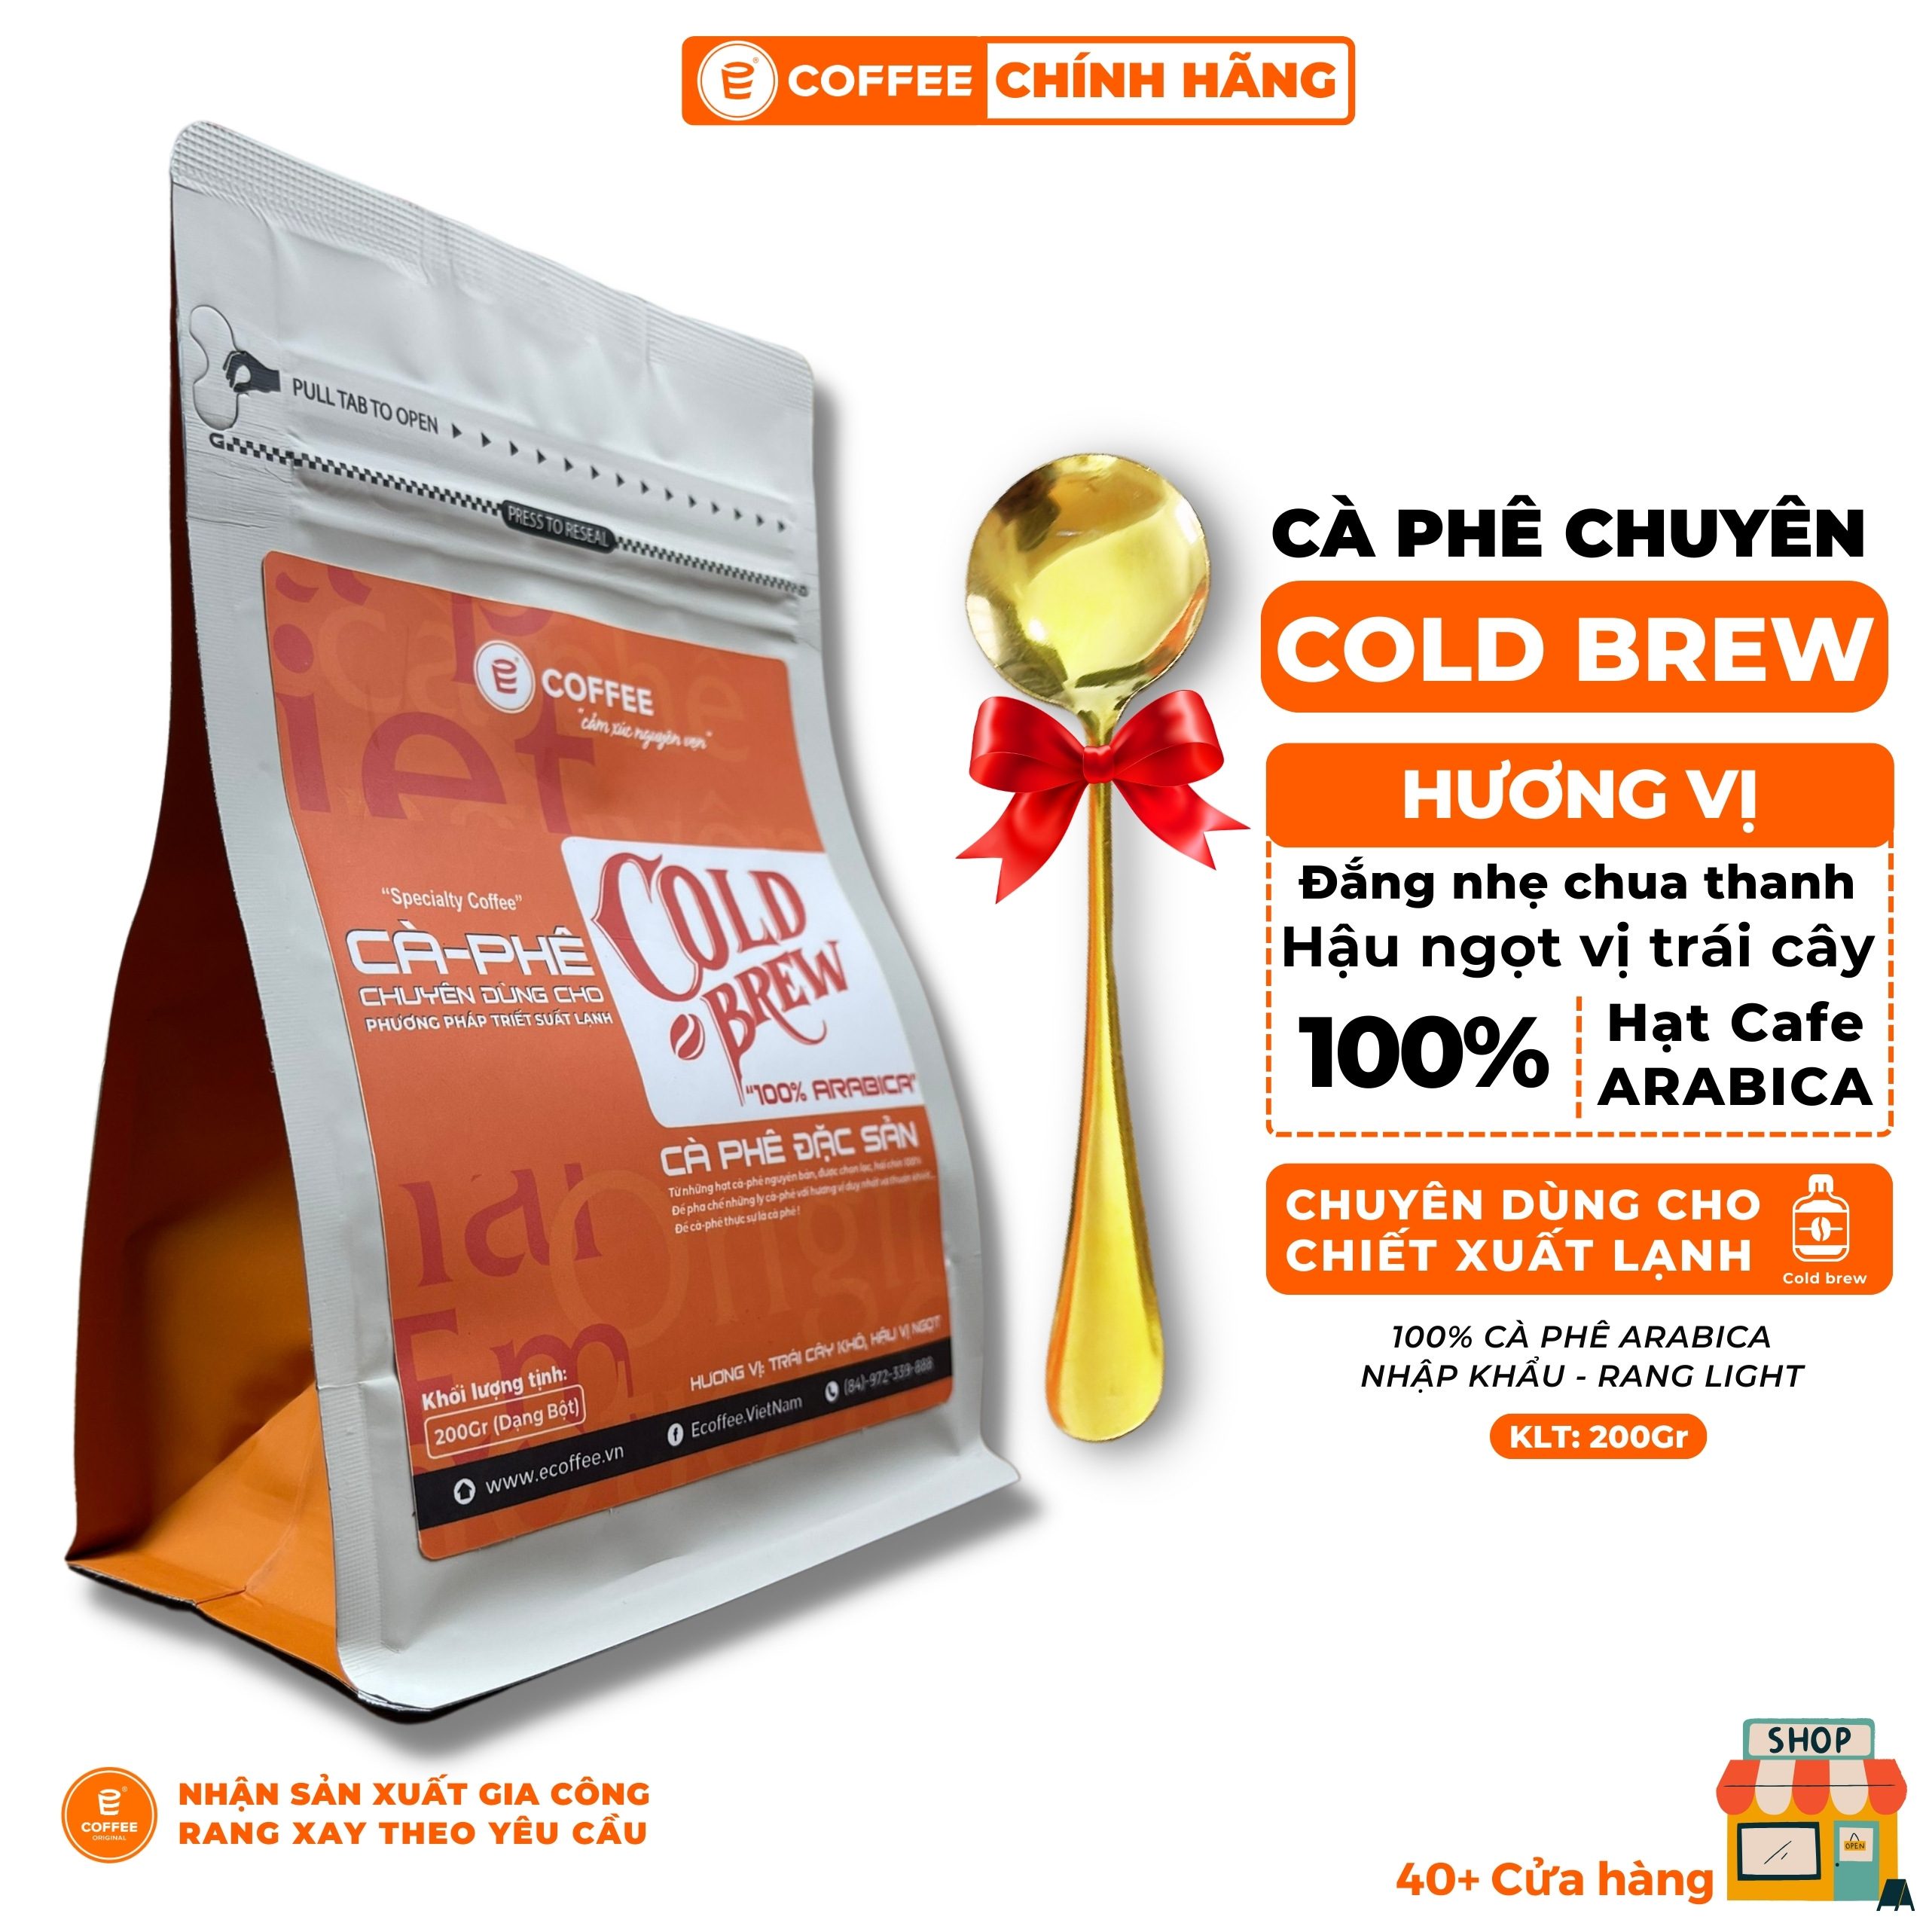 Cold brew Arabica coffee specially crafted for cold extraction